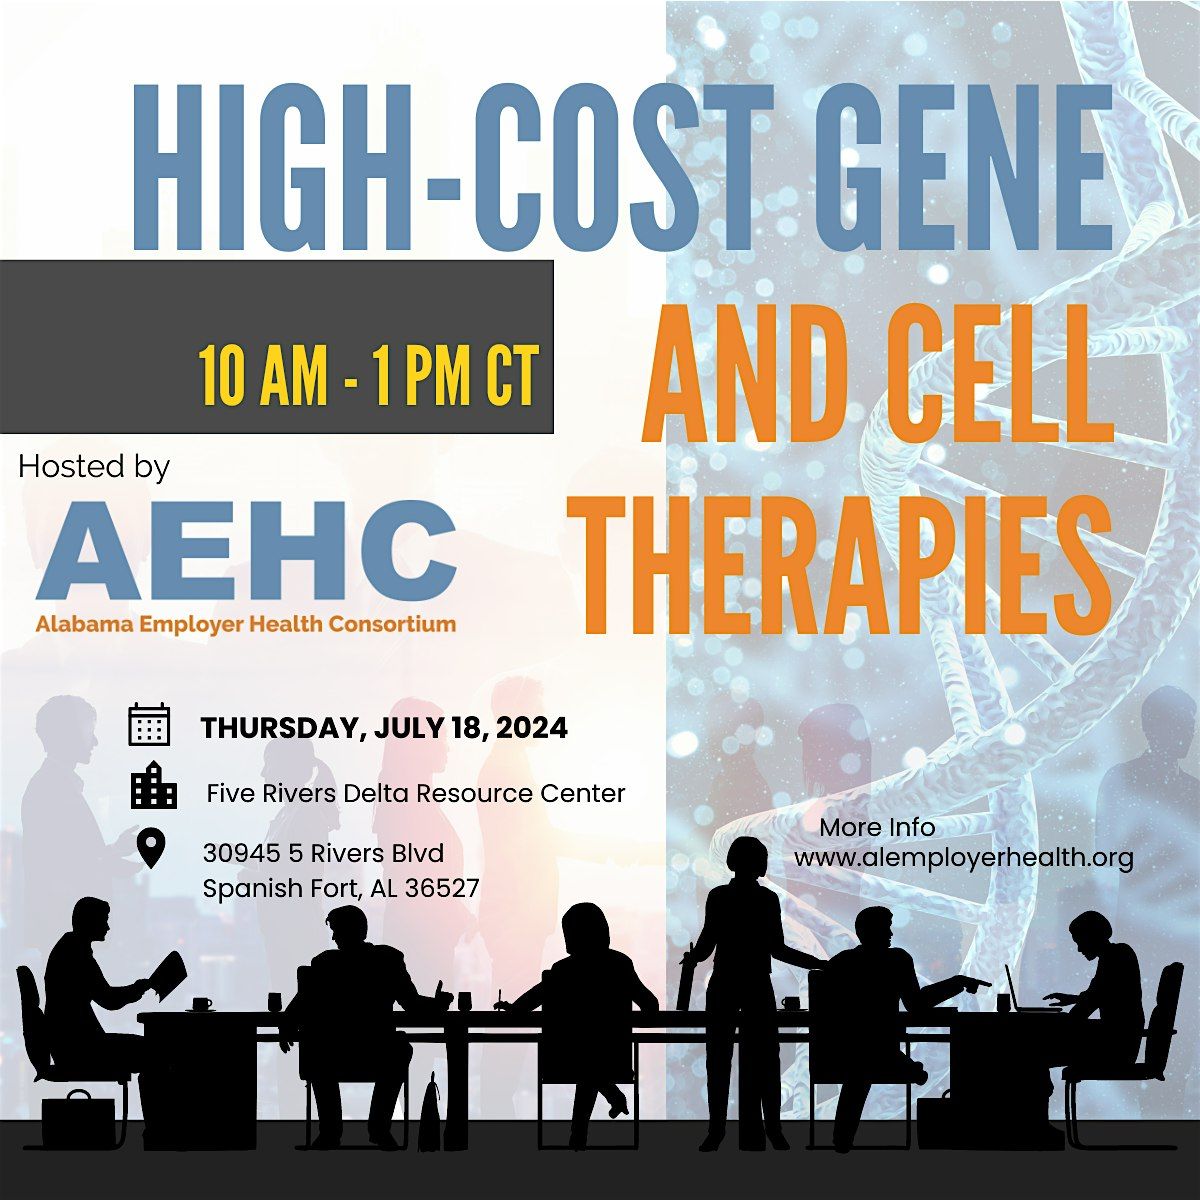 High-Cost Gene & Cell Therapies